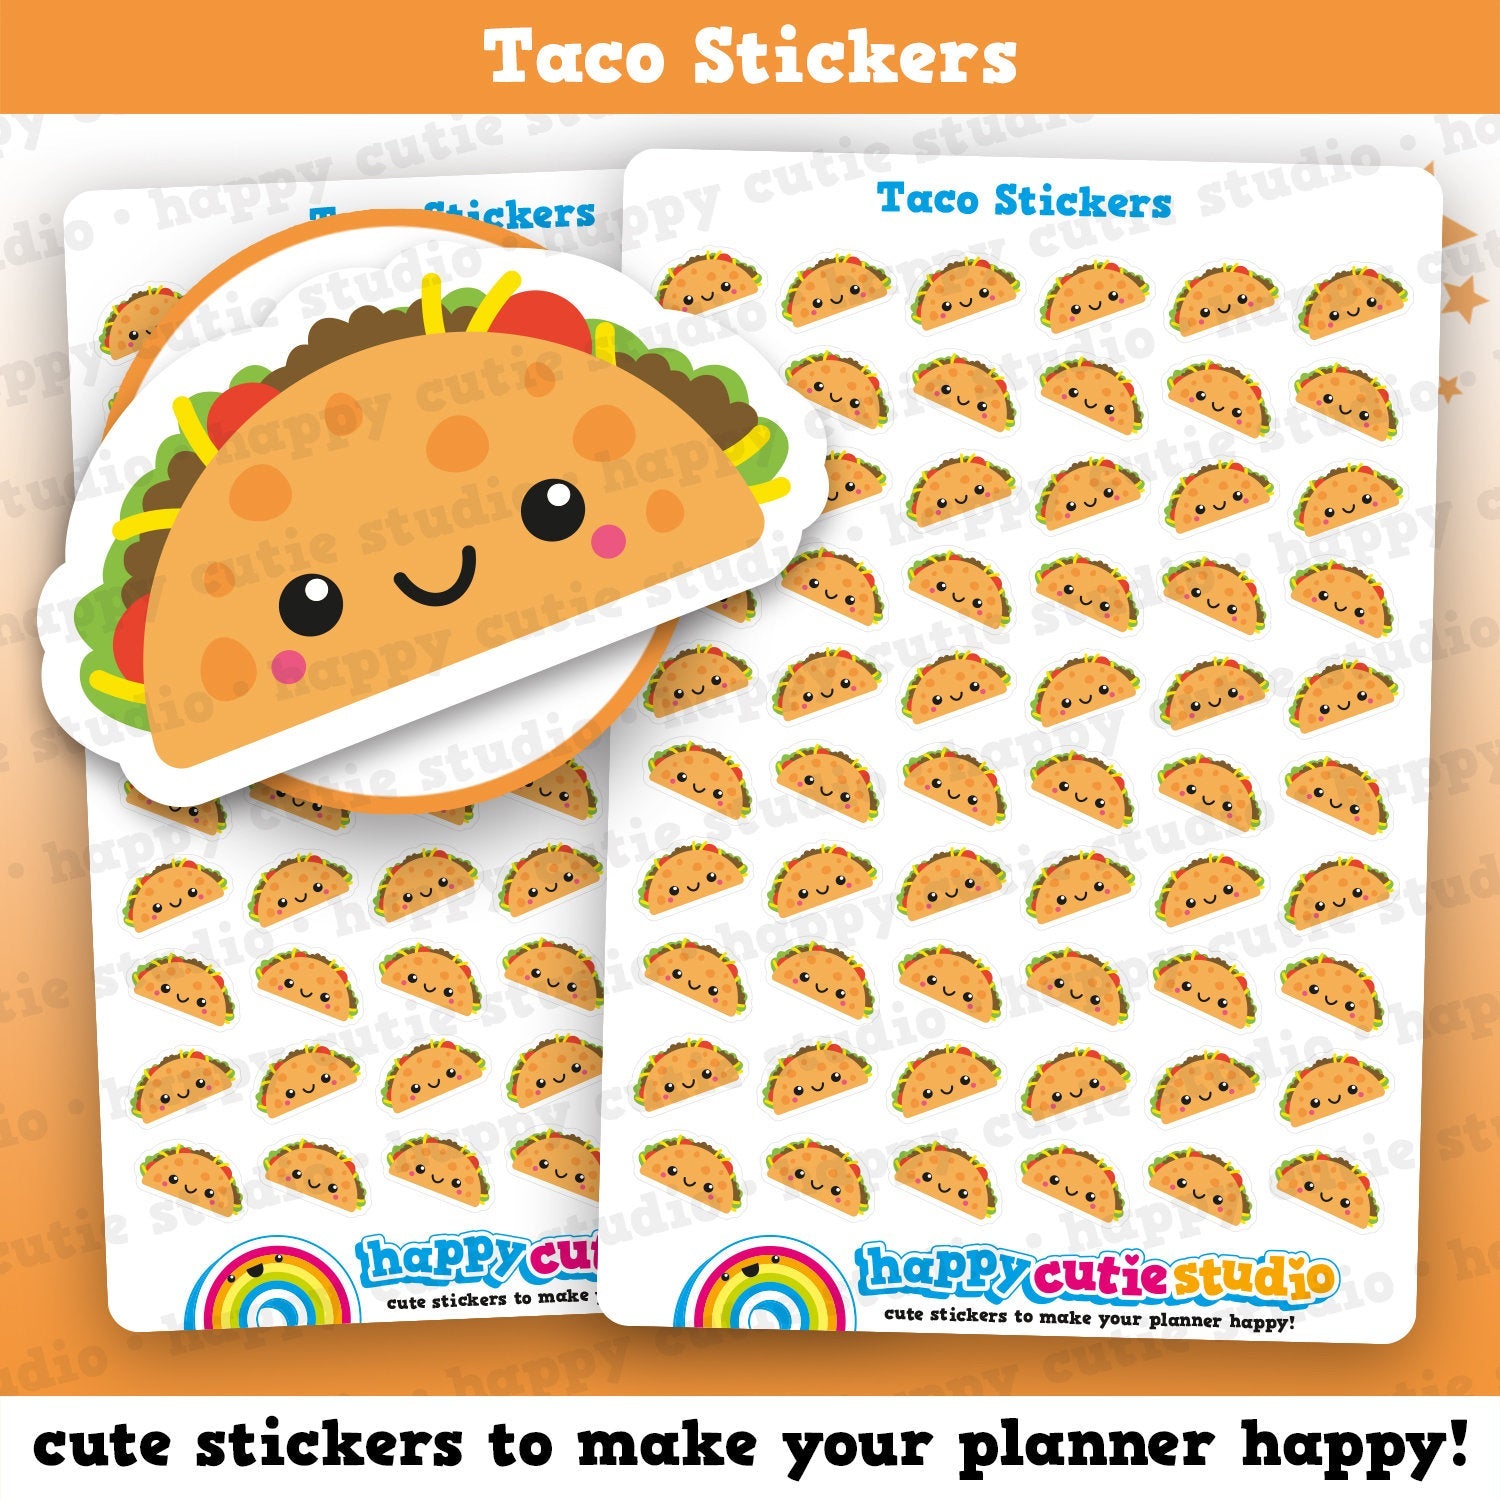 60 Cute Taco Planner Stickers